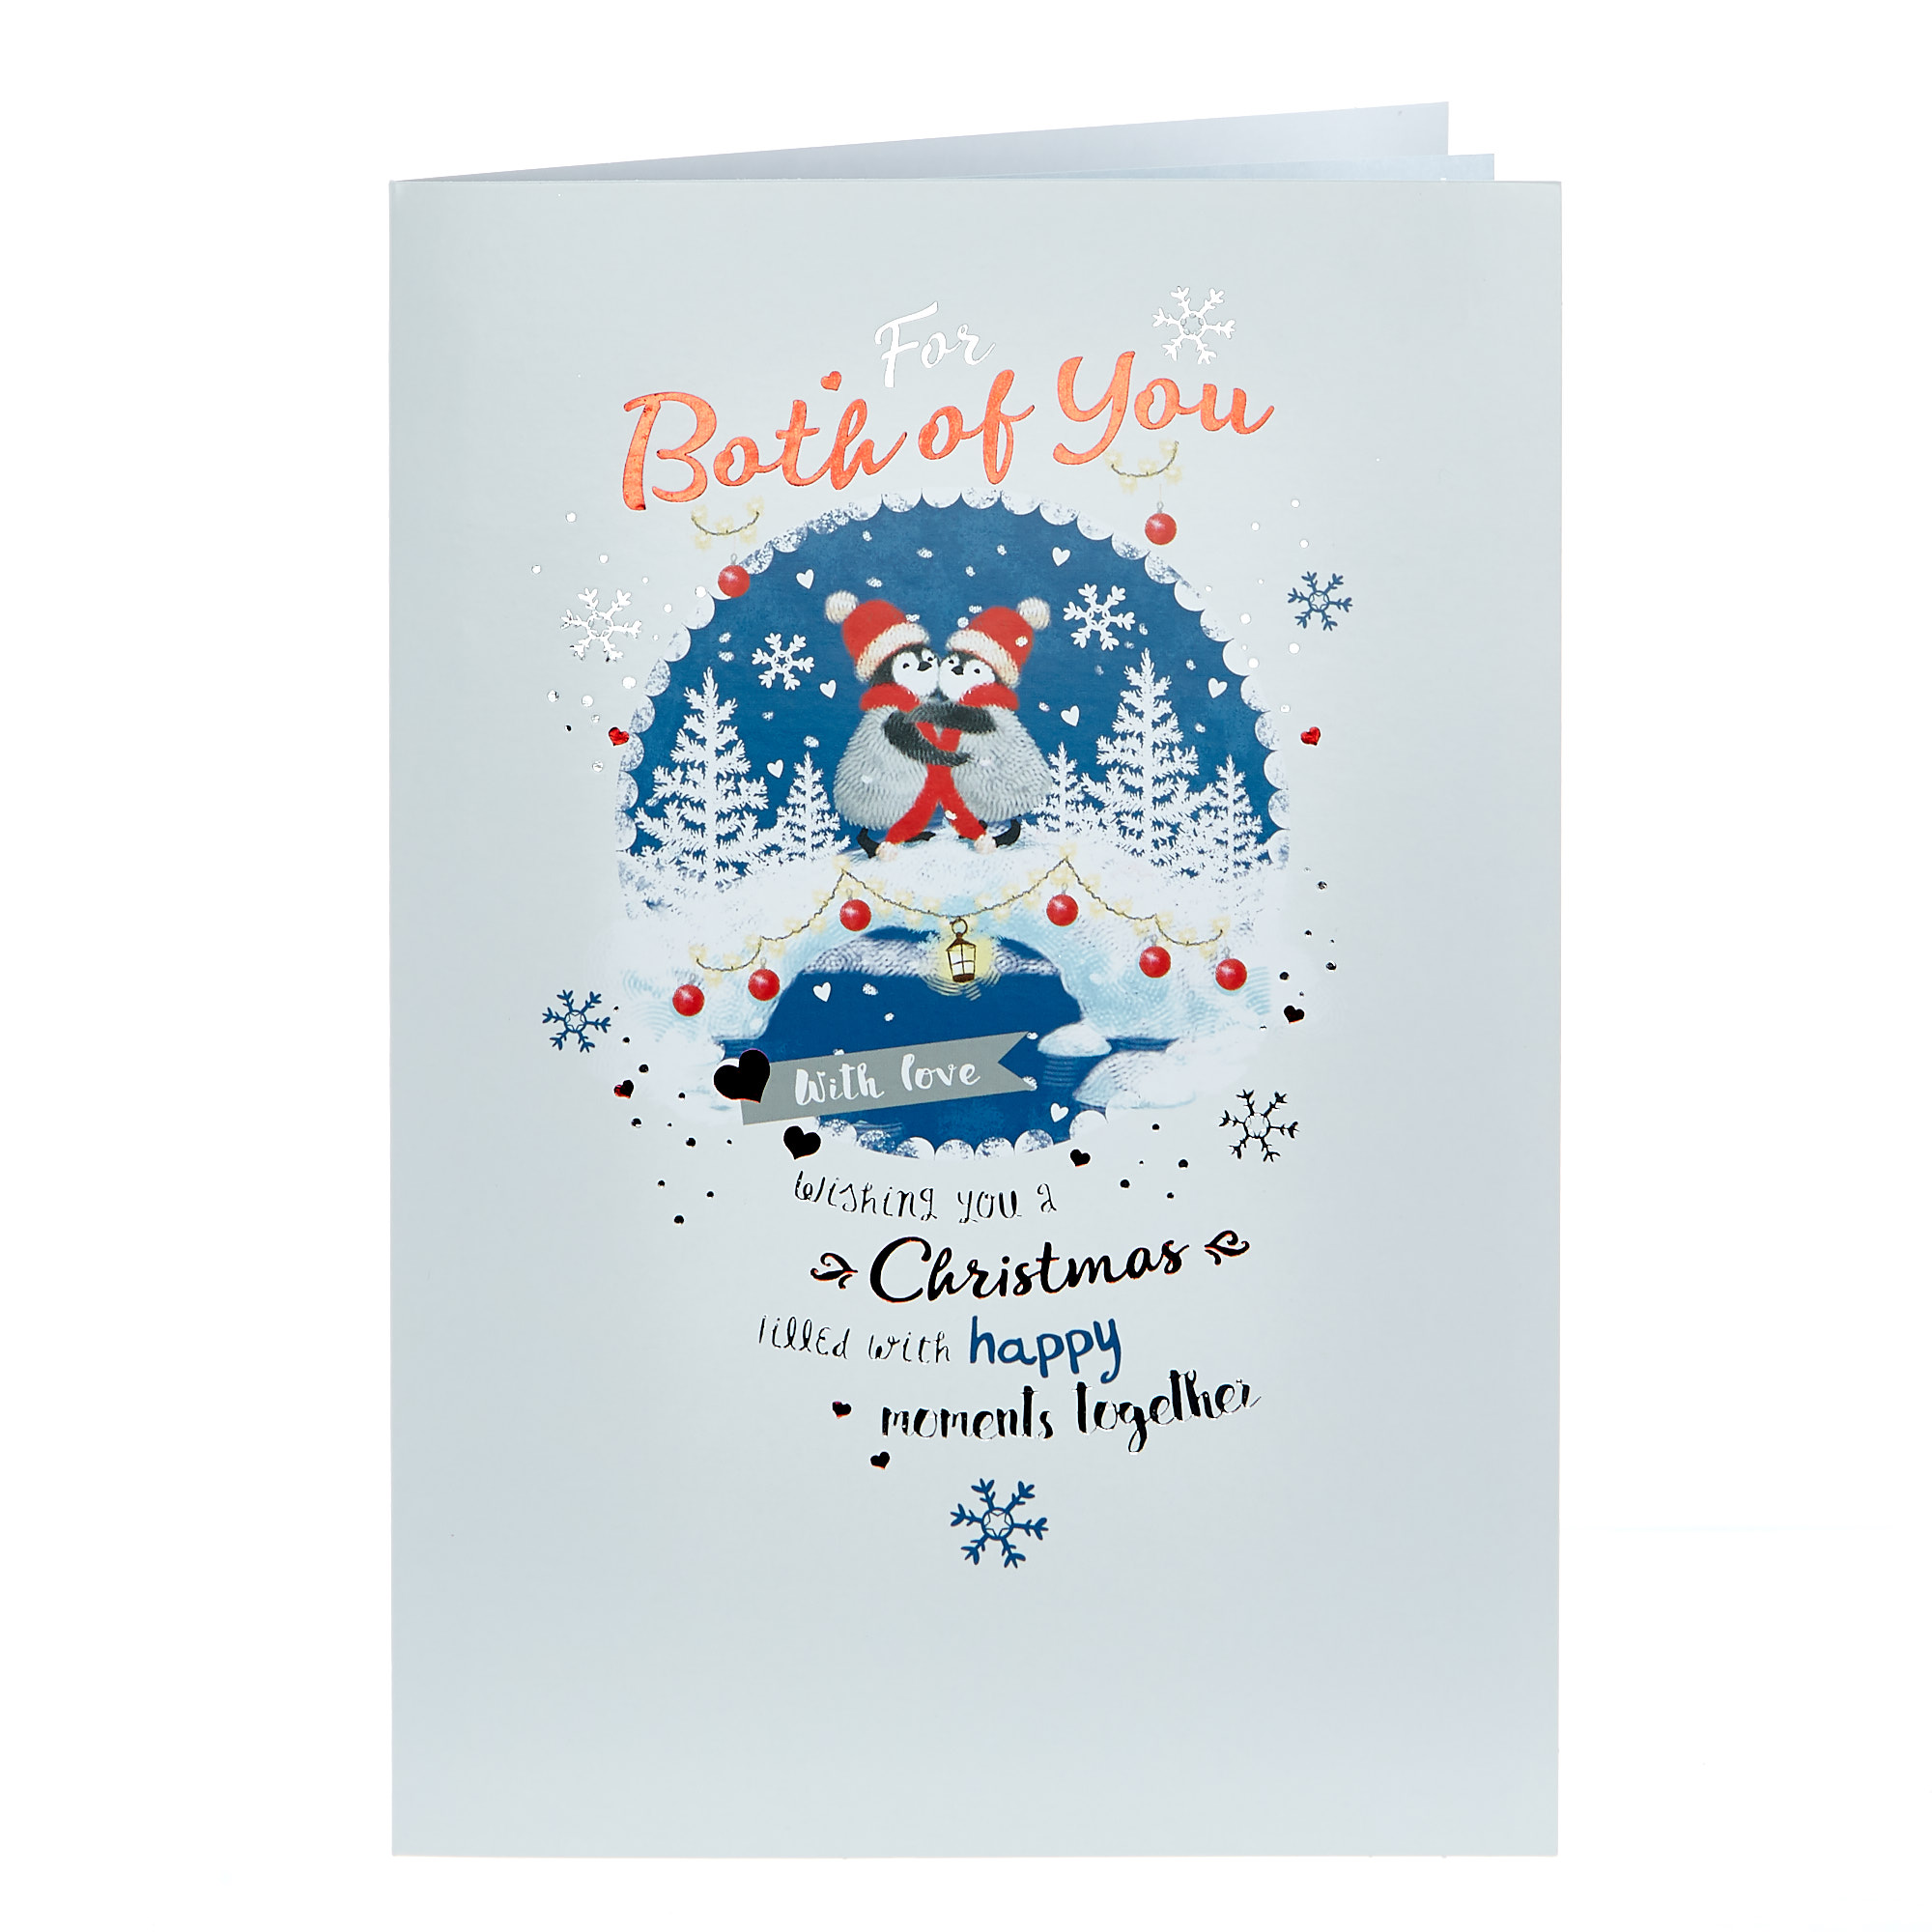 Christmas Card - For Both Of You Penguins 